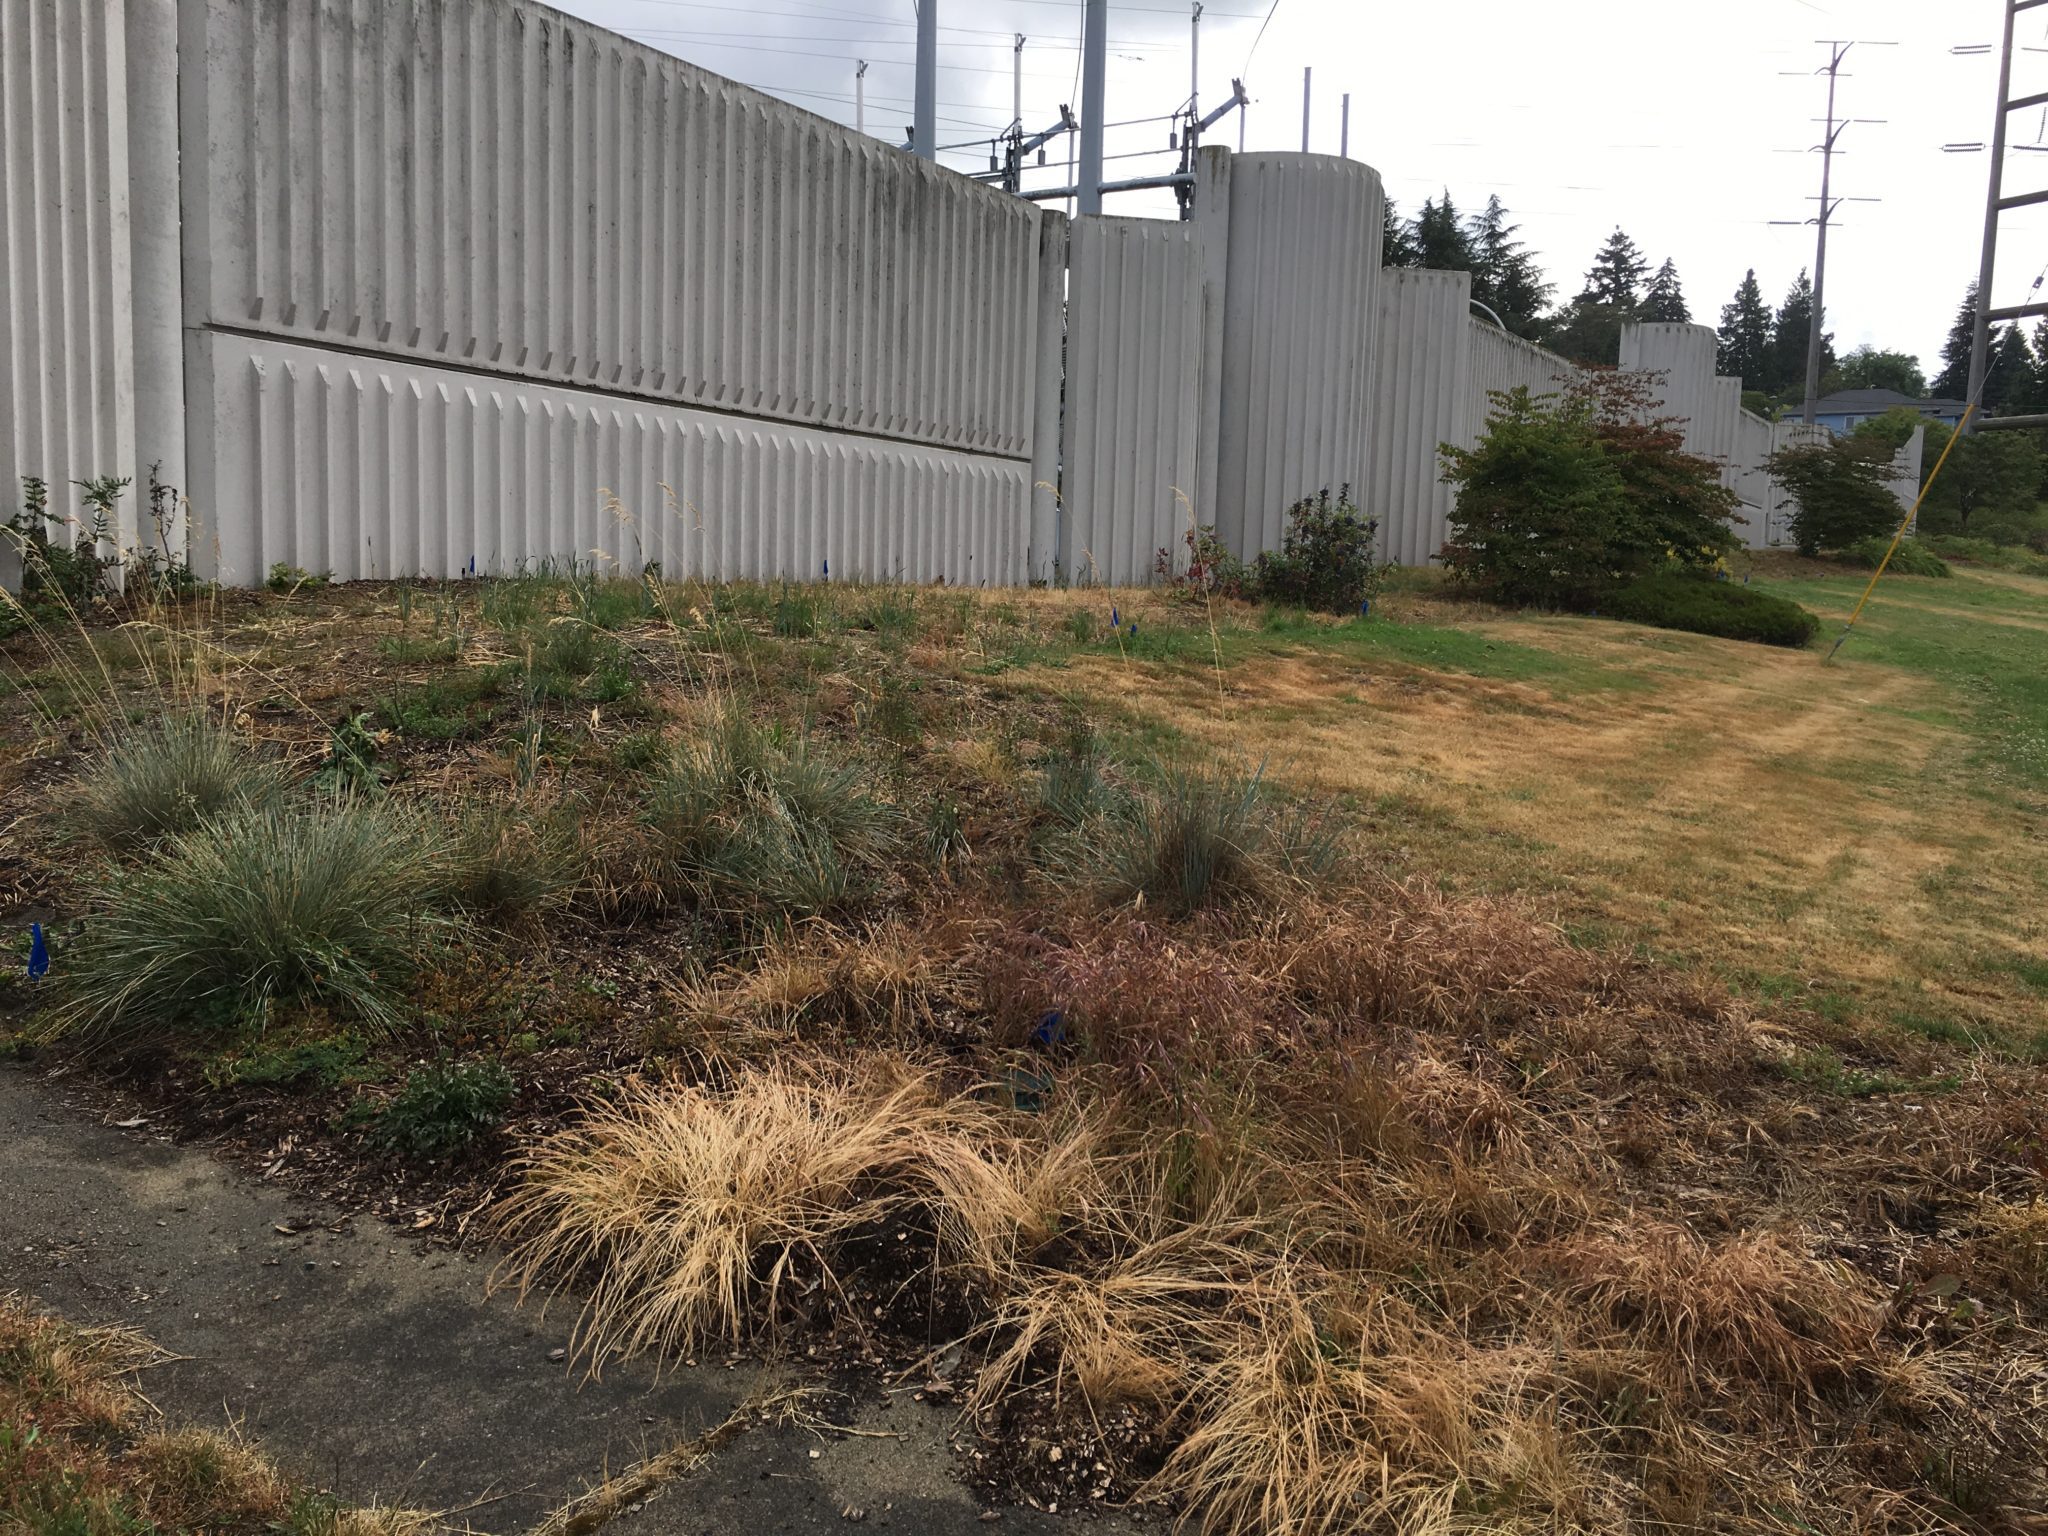 Creston-Nelson Substation's previous yard with dead yellow plants and a bare lawn